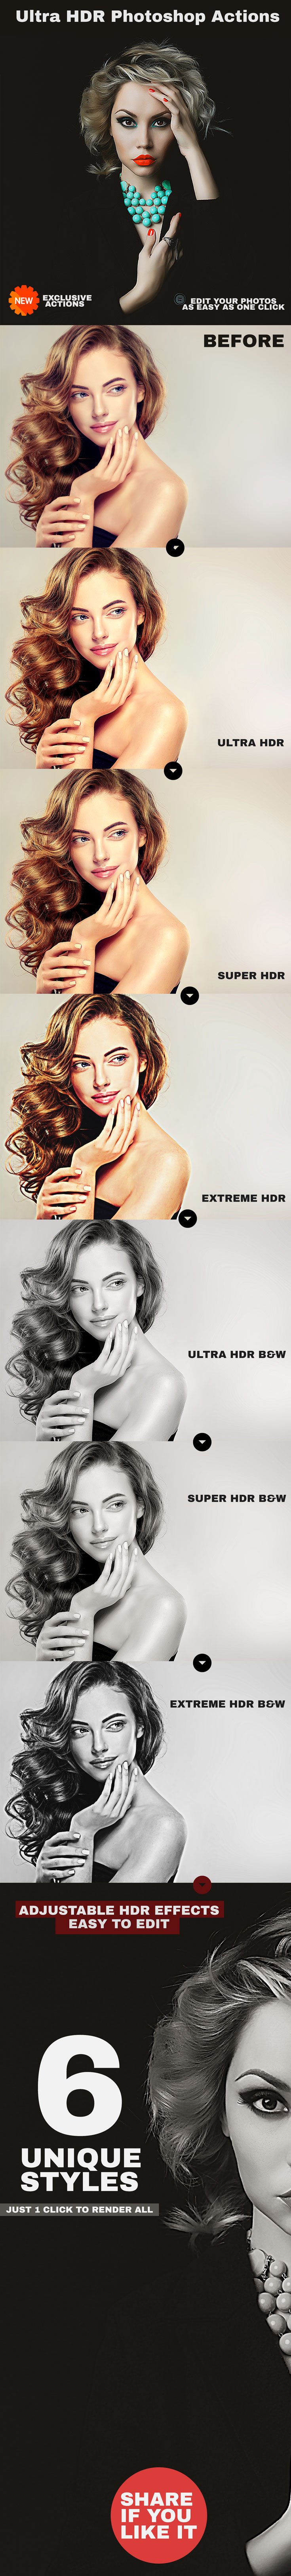 Free Ultra HDR Photoshop Actions